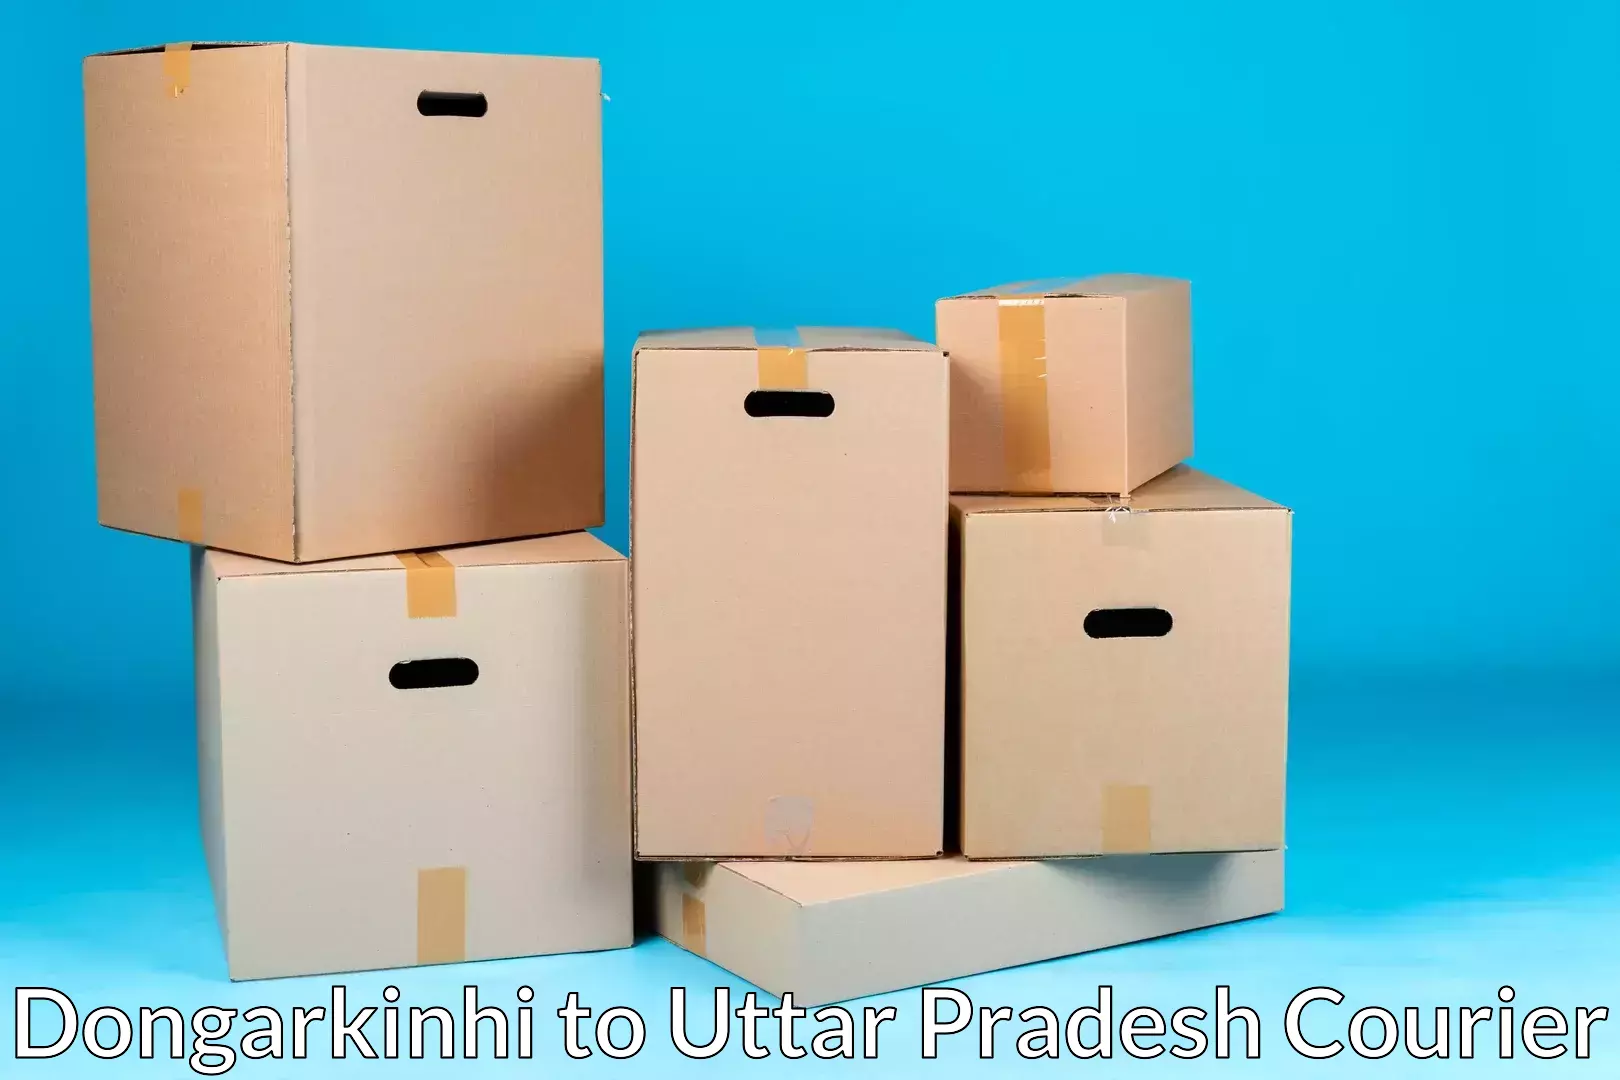 Specialized moving company Dongarkinhi to Sitapur